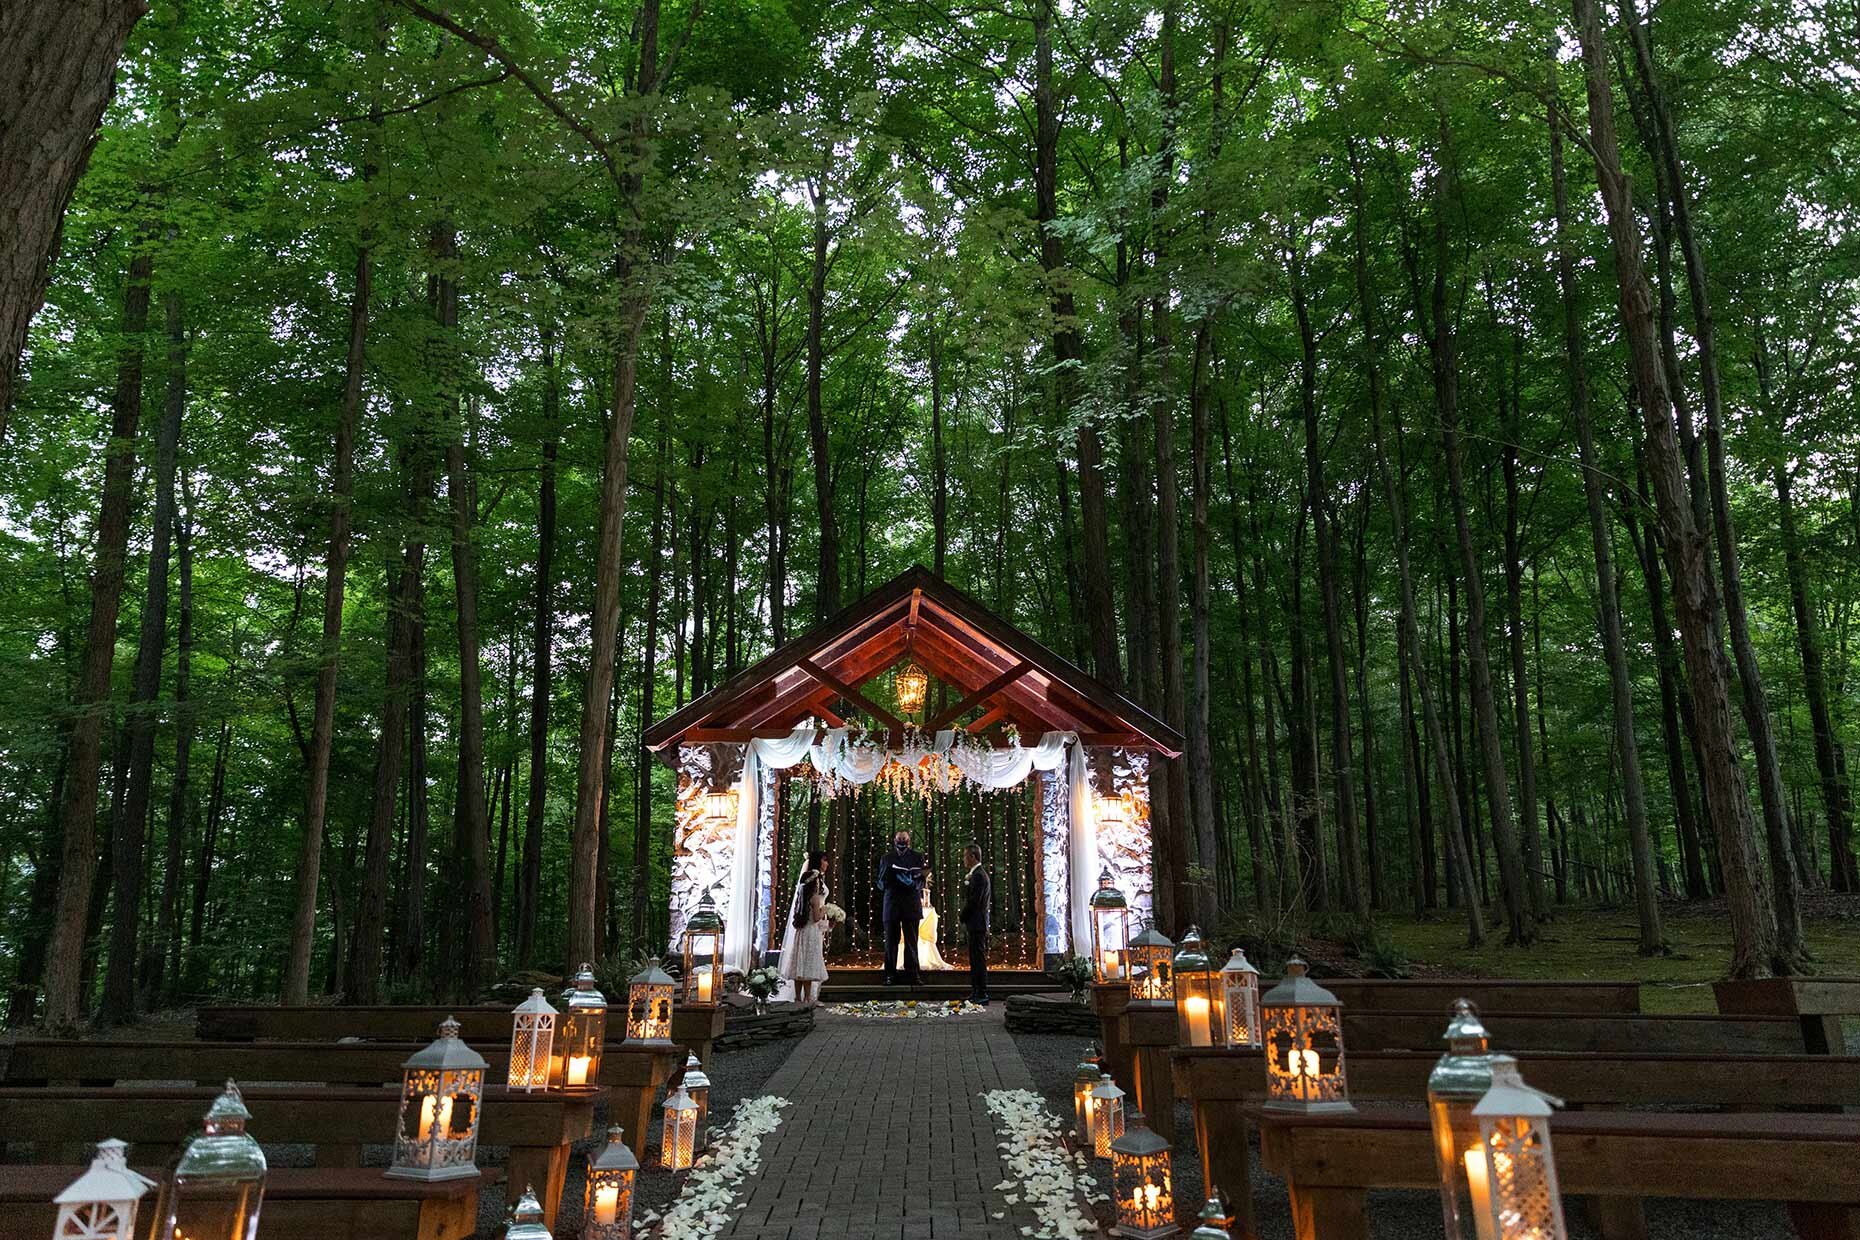 Ceremony alter in the woods at night